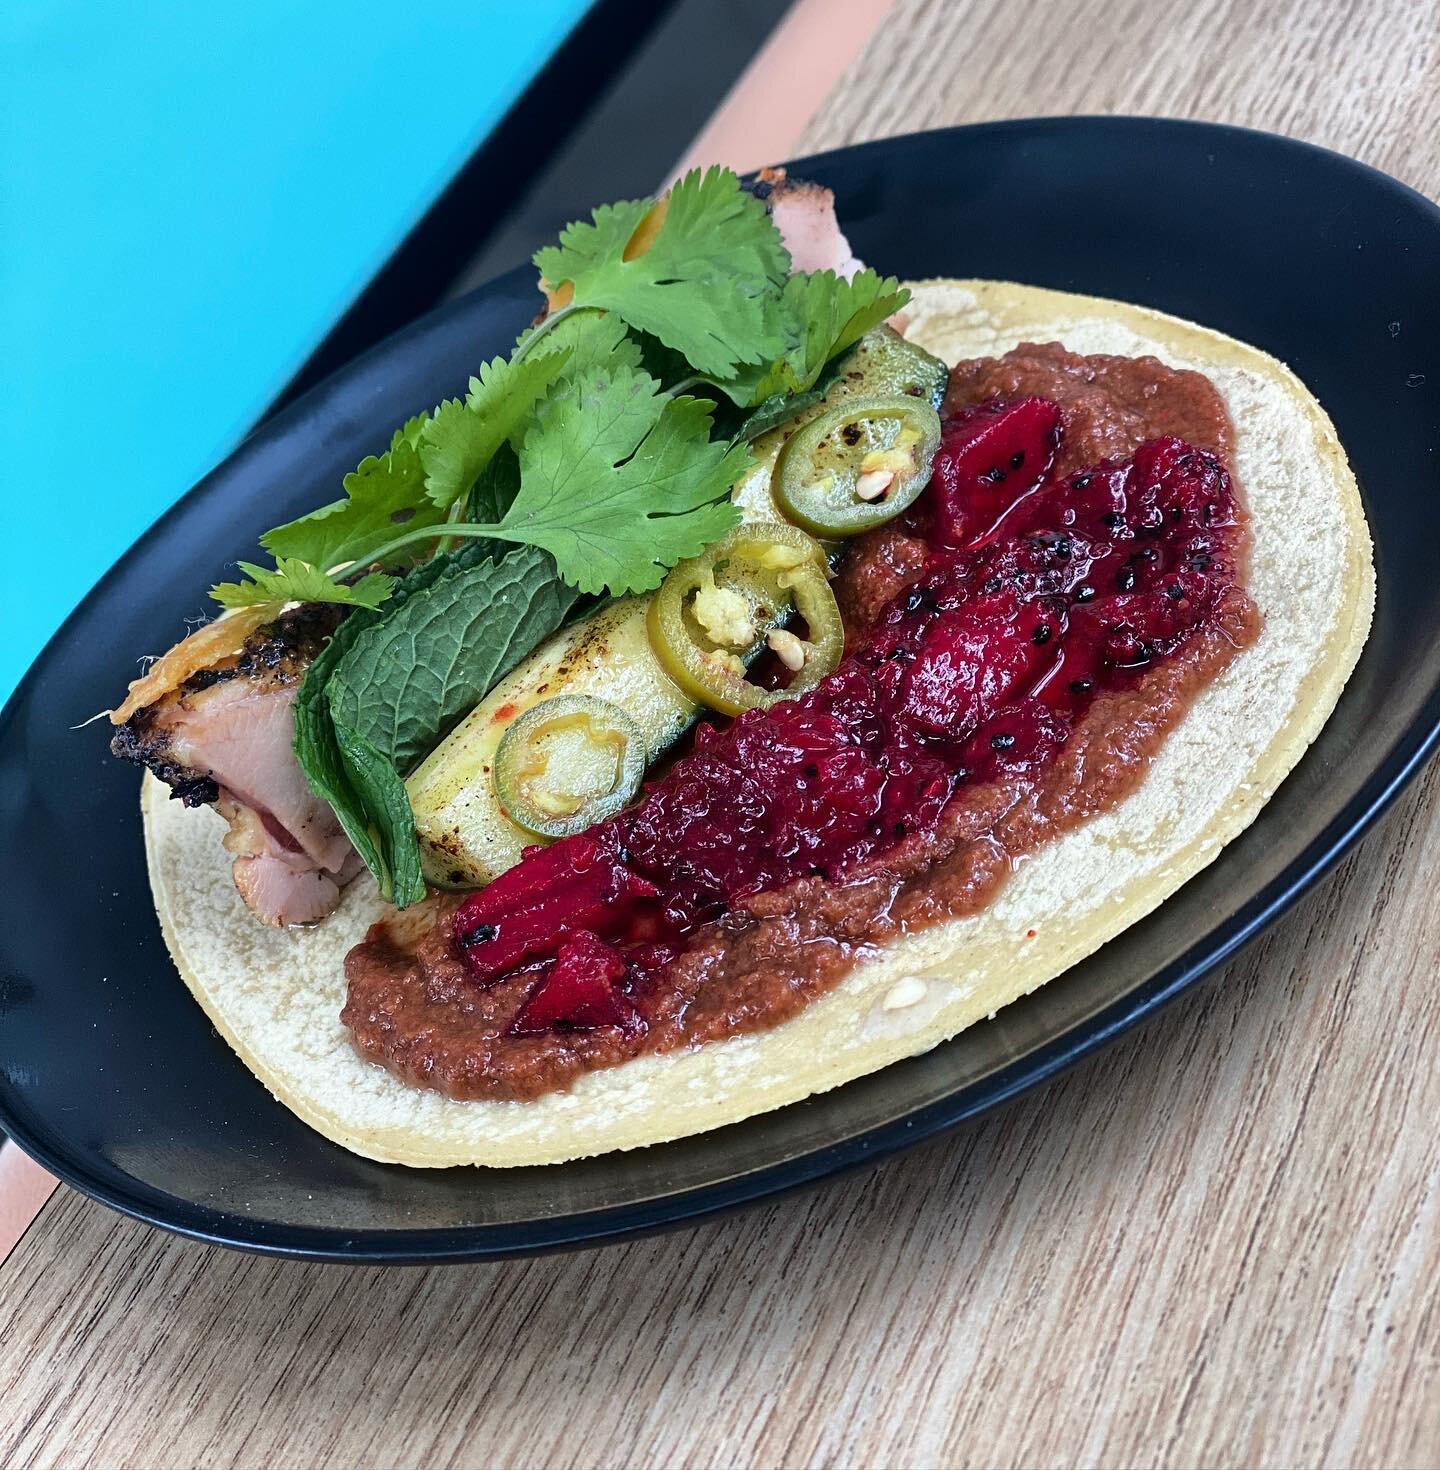 Introducing the Pitaya Chicken Taco&hellip;it&rsquo;s a balance of sweetness &amp; spice that will have you coming back for more! 

Mesquite Grilled Chicken
Pitaya &amp; chili salsa
Pasilla &amp; lime cucumber
Chicken chicharr&oacute;n 
Serranos
Mint